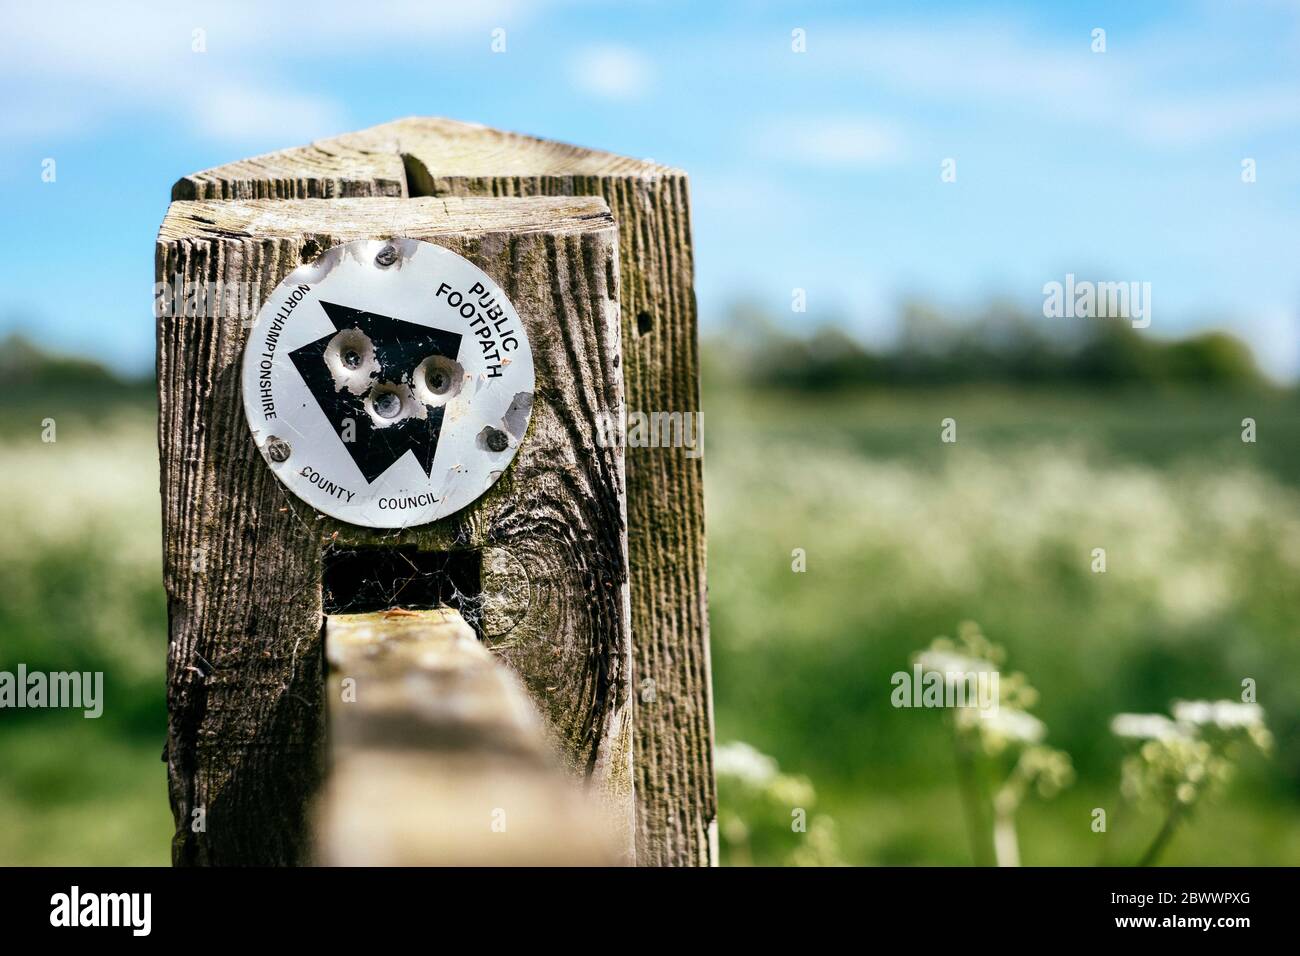 A public footpath sign on a fence post near Bugbrooke, Northamptonshire Stock Photo